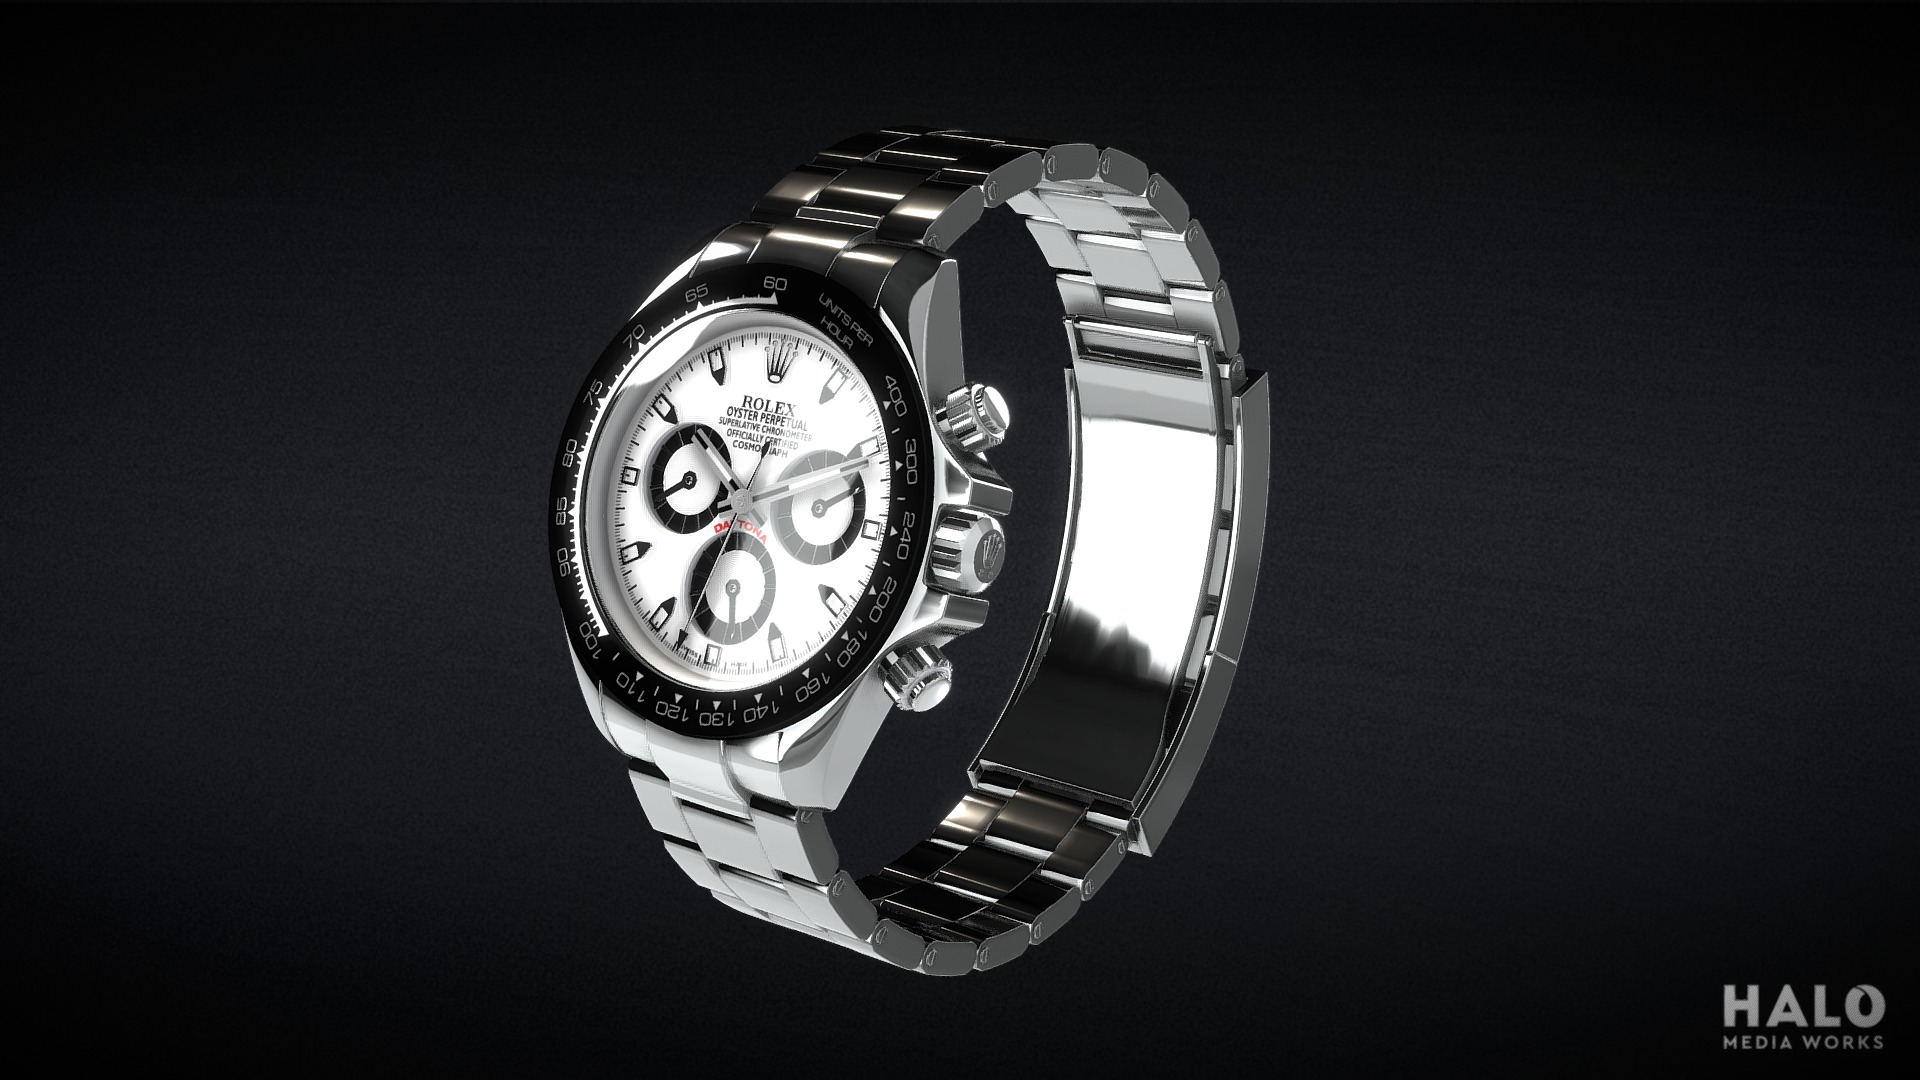 3D model Rolex Cosmograph Daytona Watch - This is a 3D model of the Rolex Cosmograph Daytona Watch. The 3D model is about a silver watch with a black background.